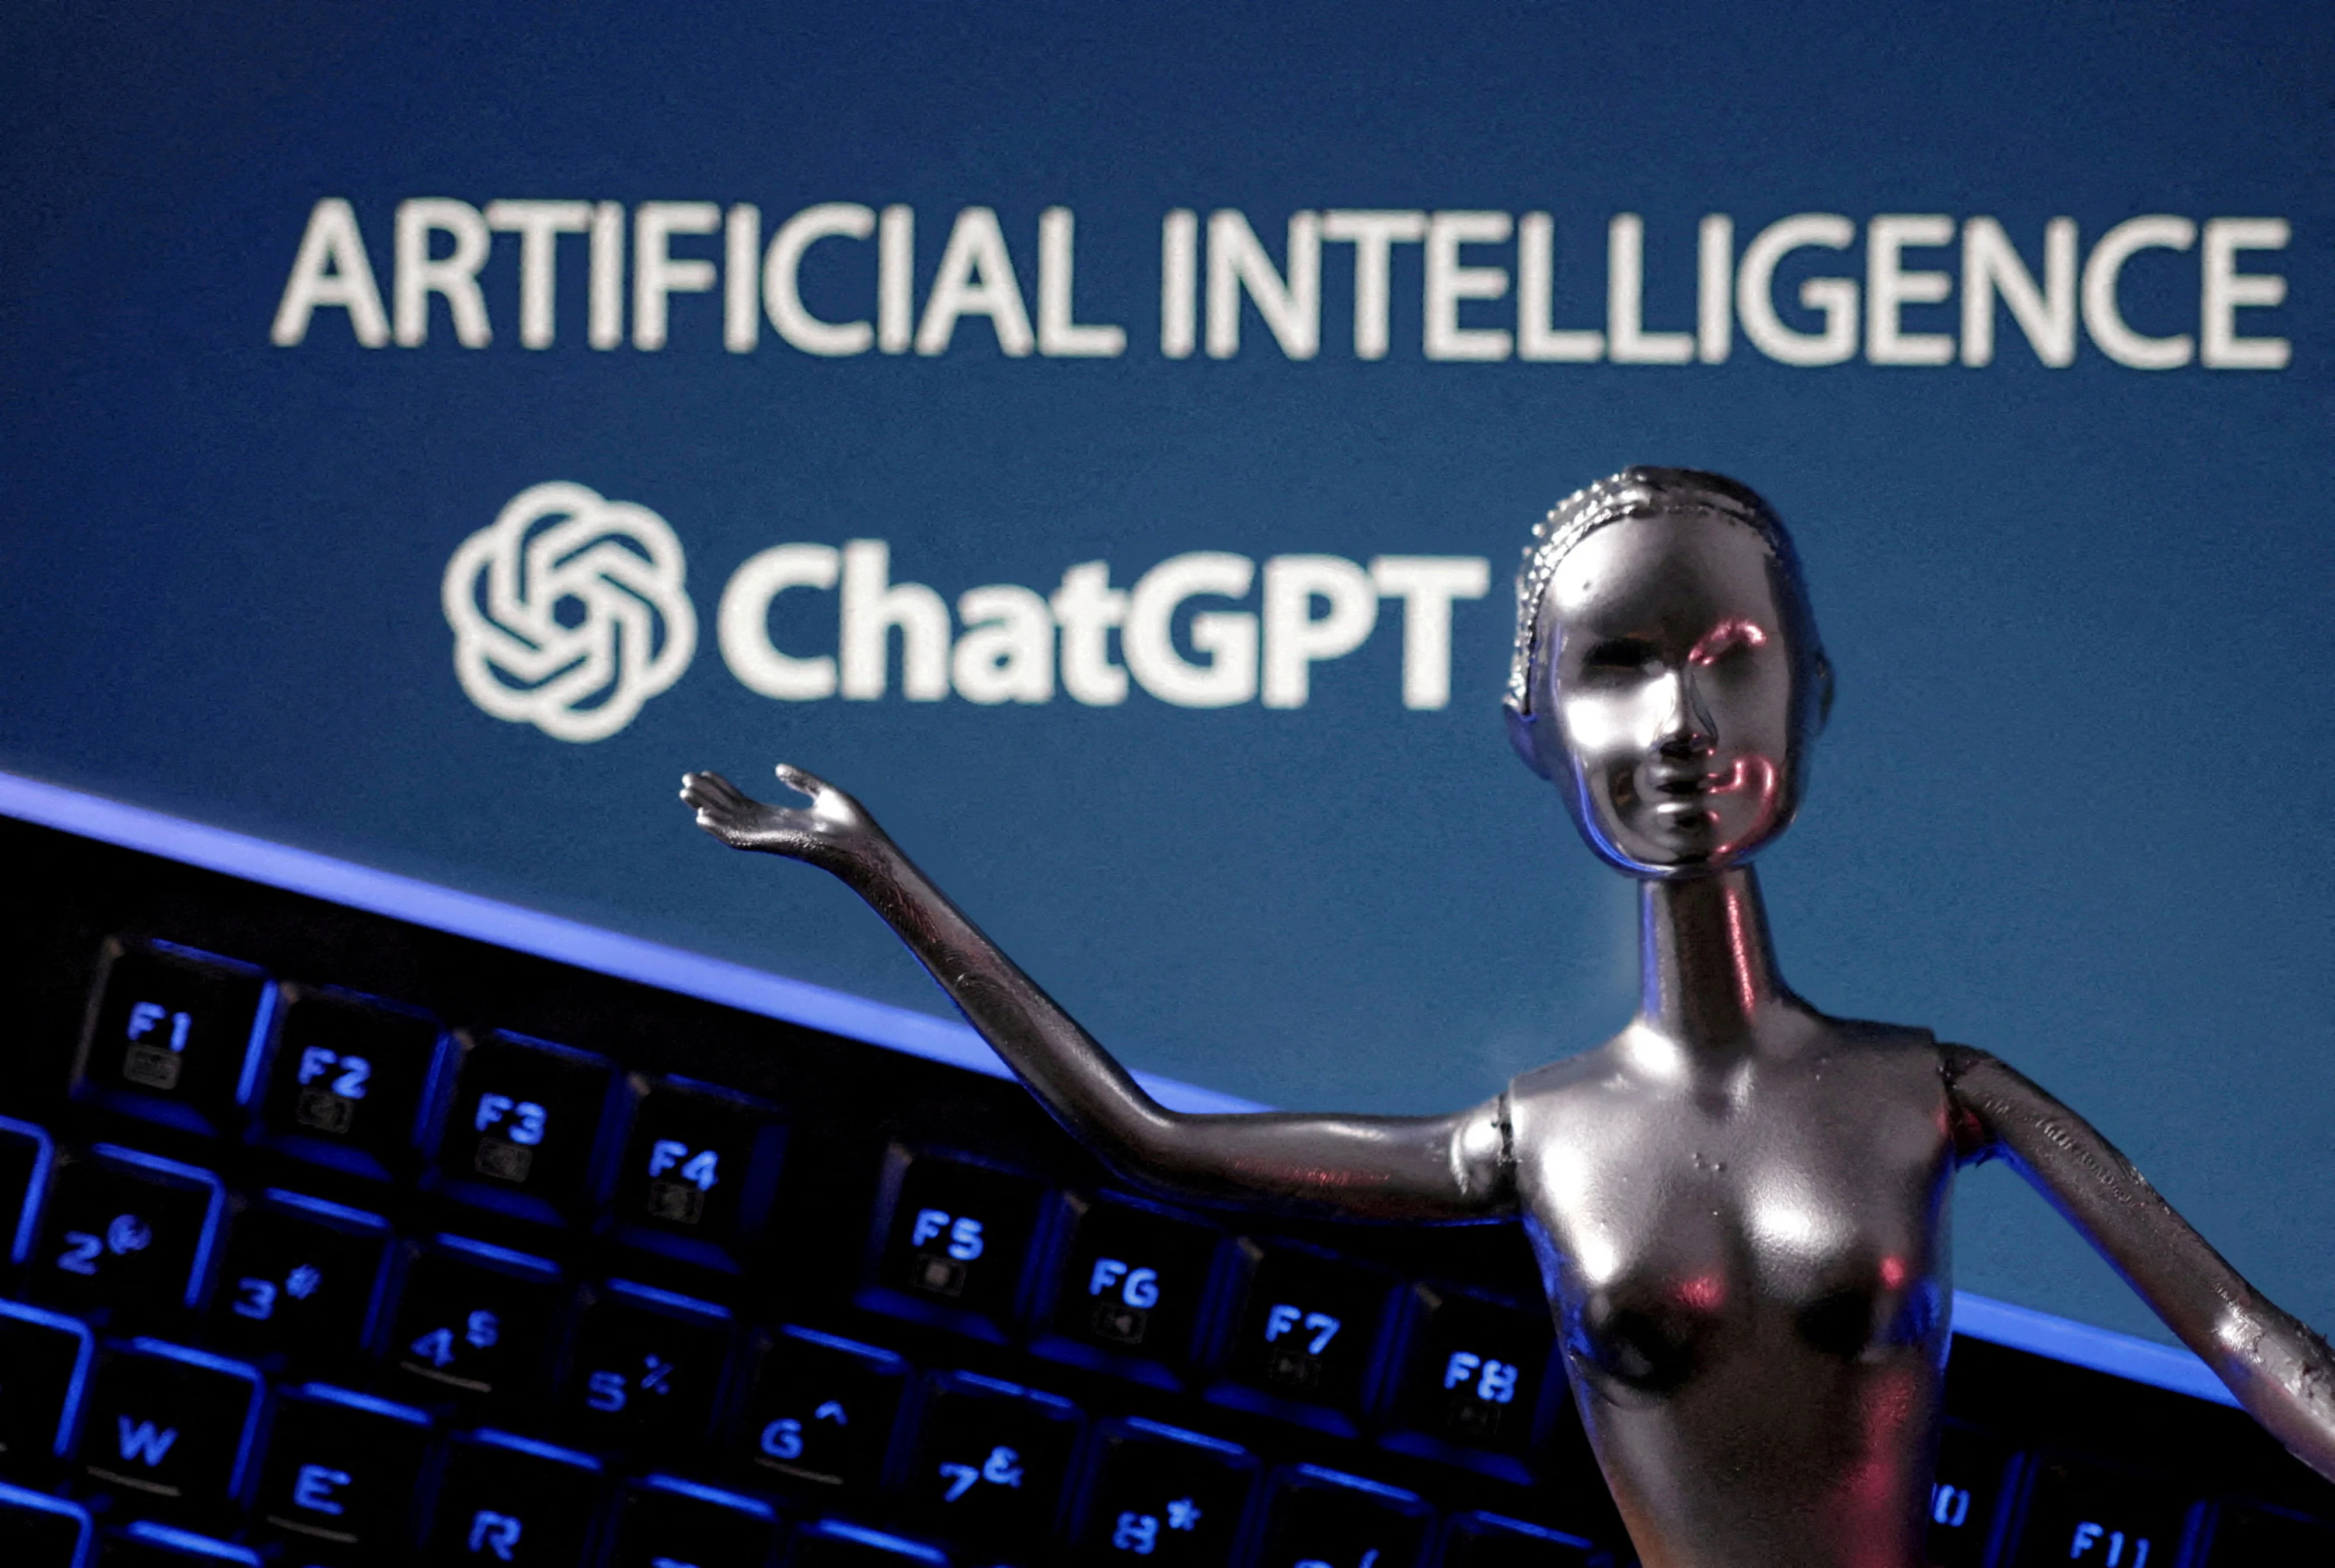 OpenAI Breaks New Ground: ChatGPT Now Masters Speech and Vision